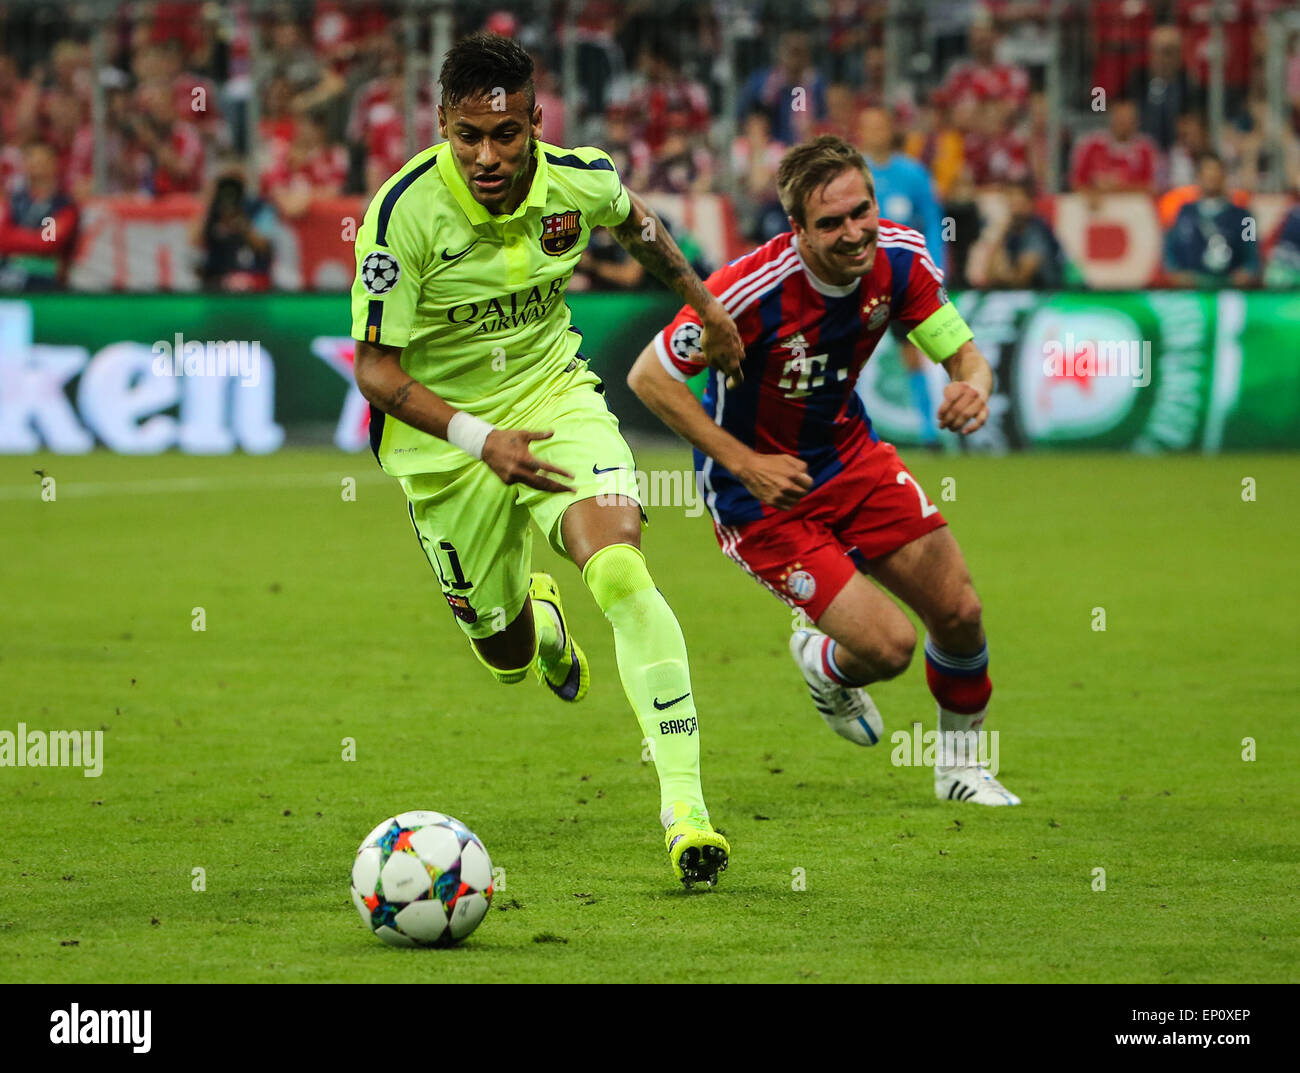 Munich, Germany. 12th May, 2015. Barcelona's Neymar (L) breaks through  during the UEFA Champions League semi-final second leg match between  Barcelona and Bayern Munich, in Munich, Germany, on May 12, 2015. Bayern